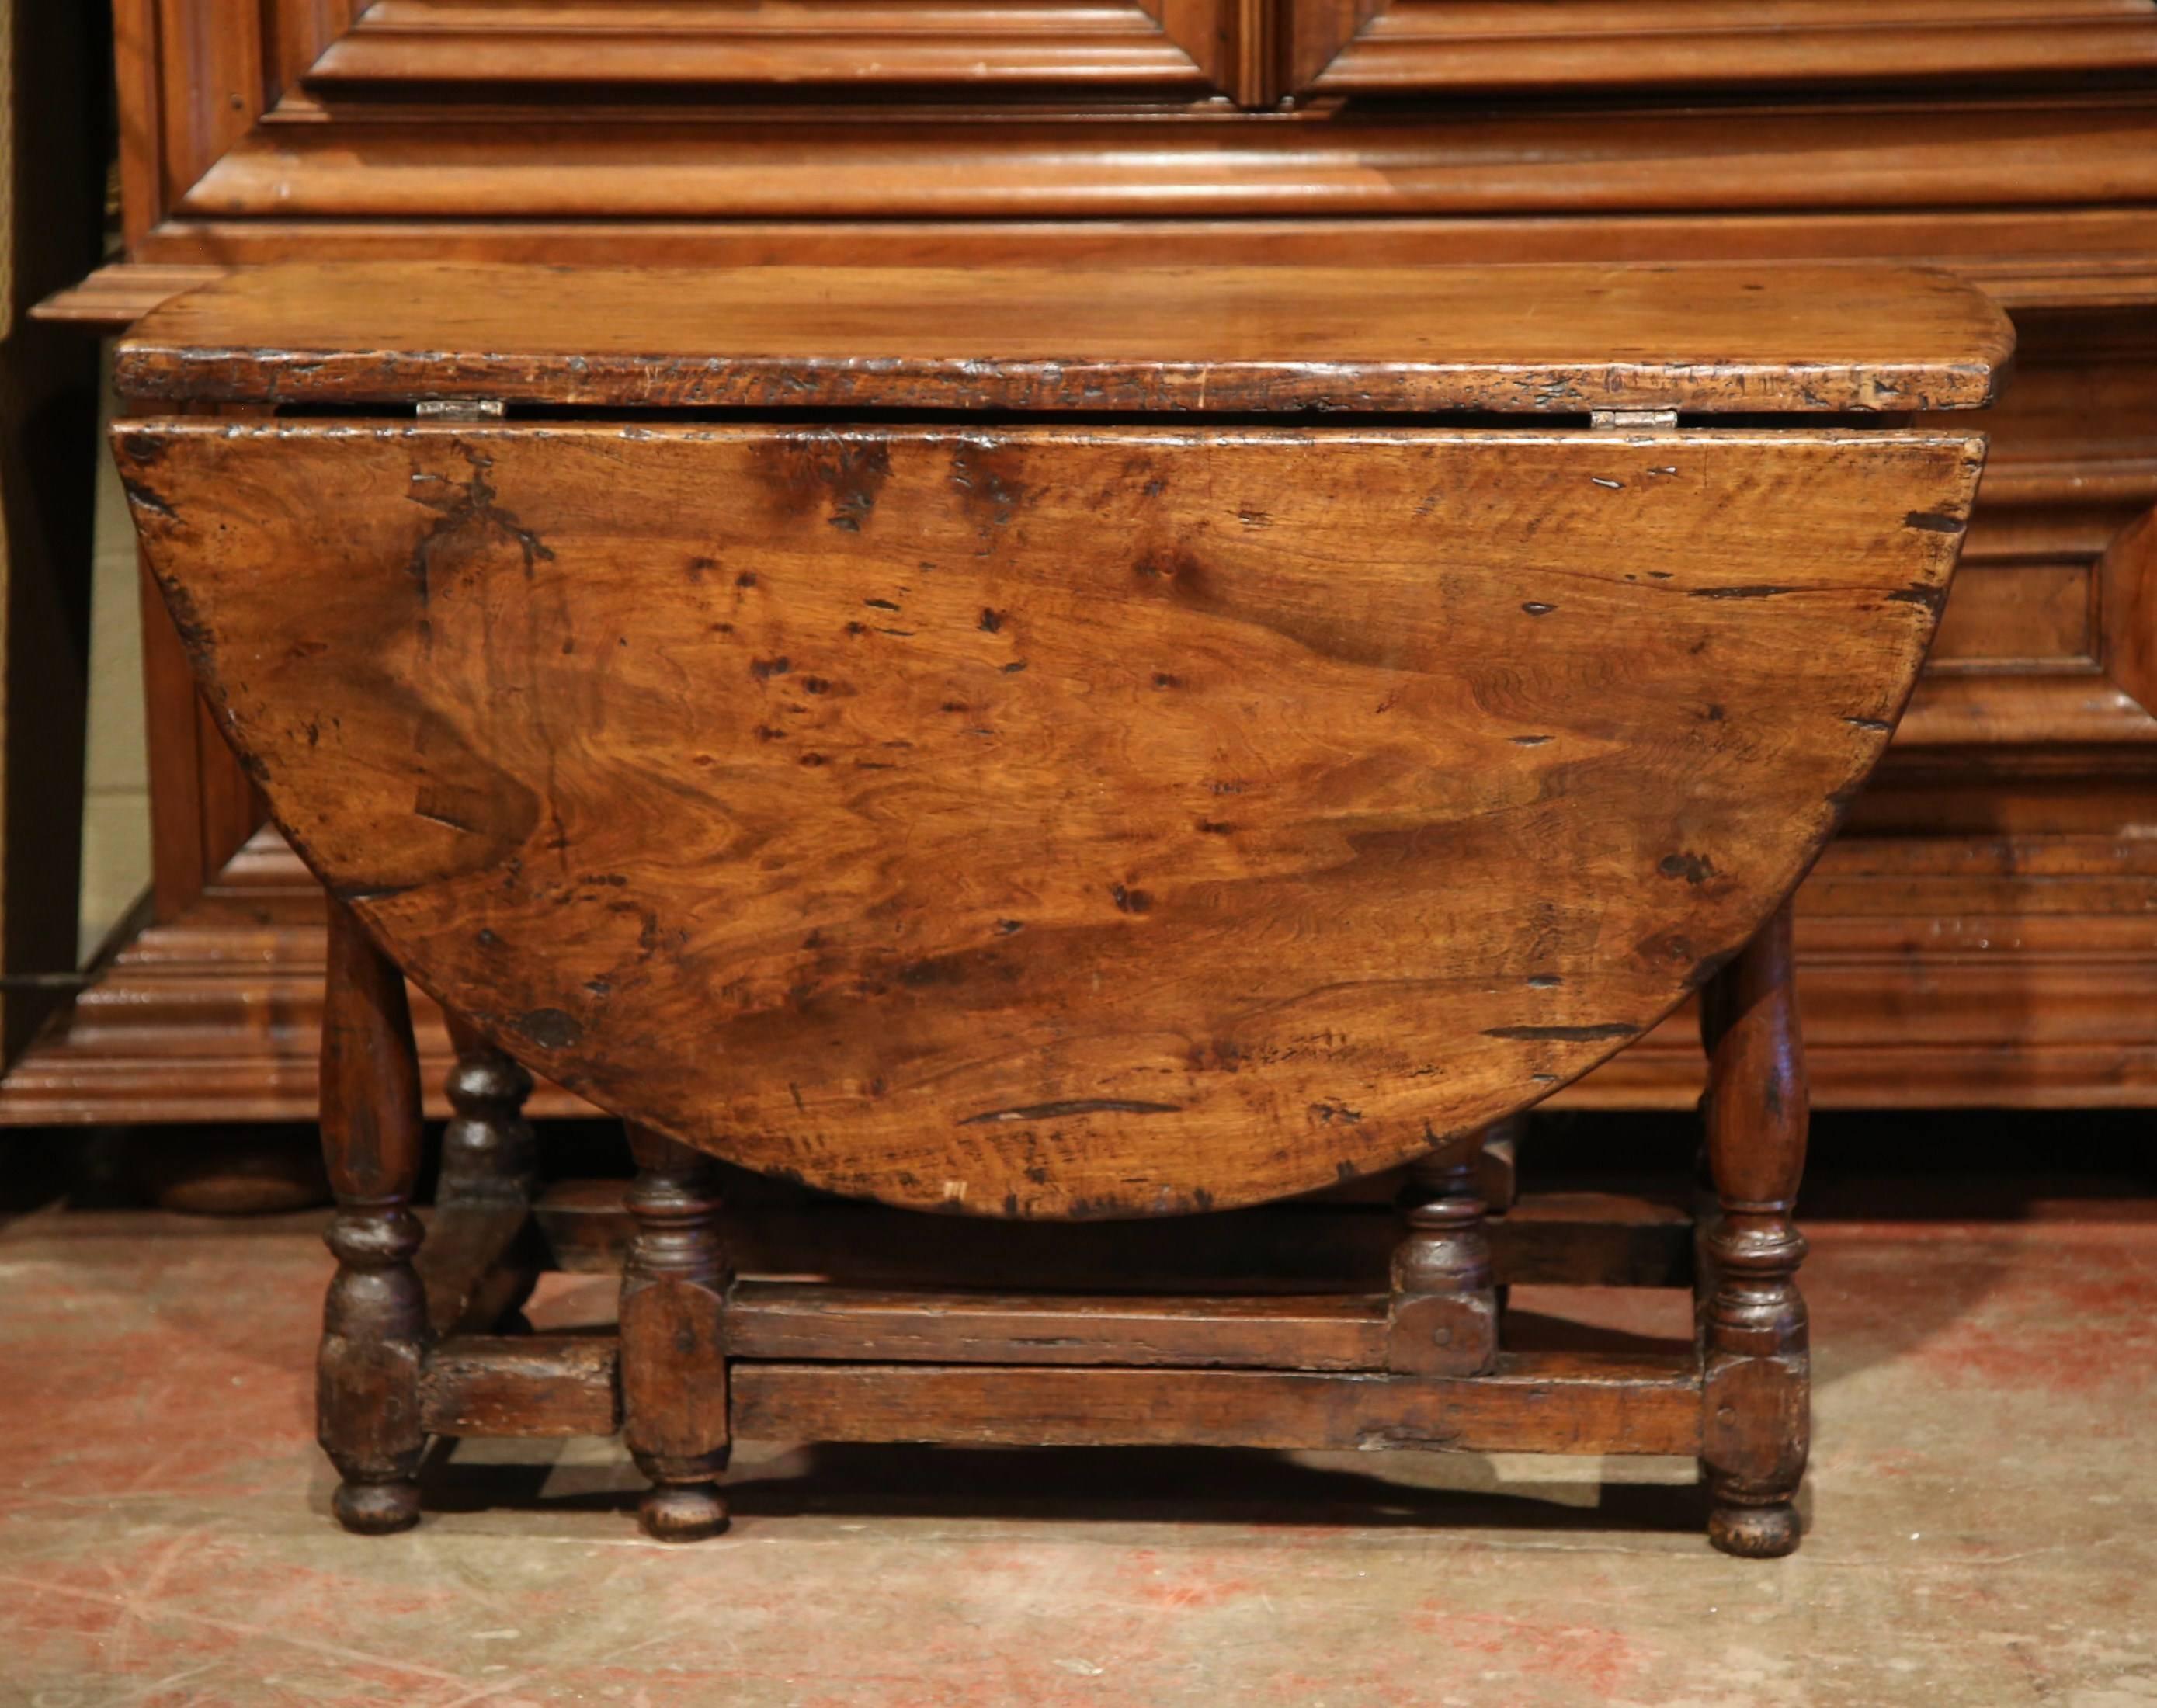 Make room to entertain many guests with this large, oval fruitwood drop-leaf breakfast room table from the Perigord. Crafted in Southern France, circa 1780, this Louis XIII table features 8 turned legs with stretcher in between and a large drawer